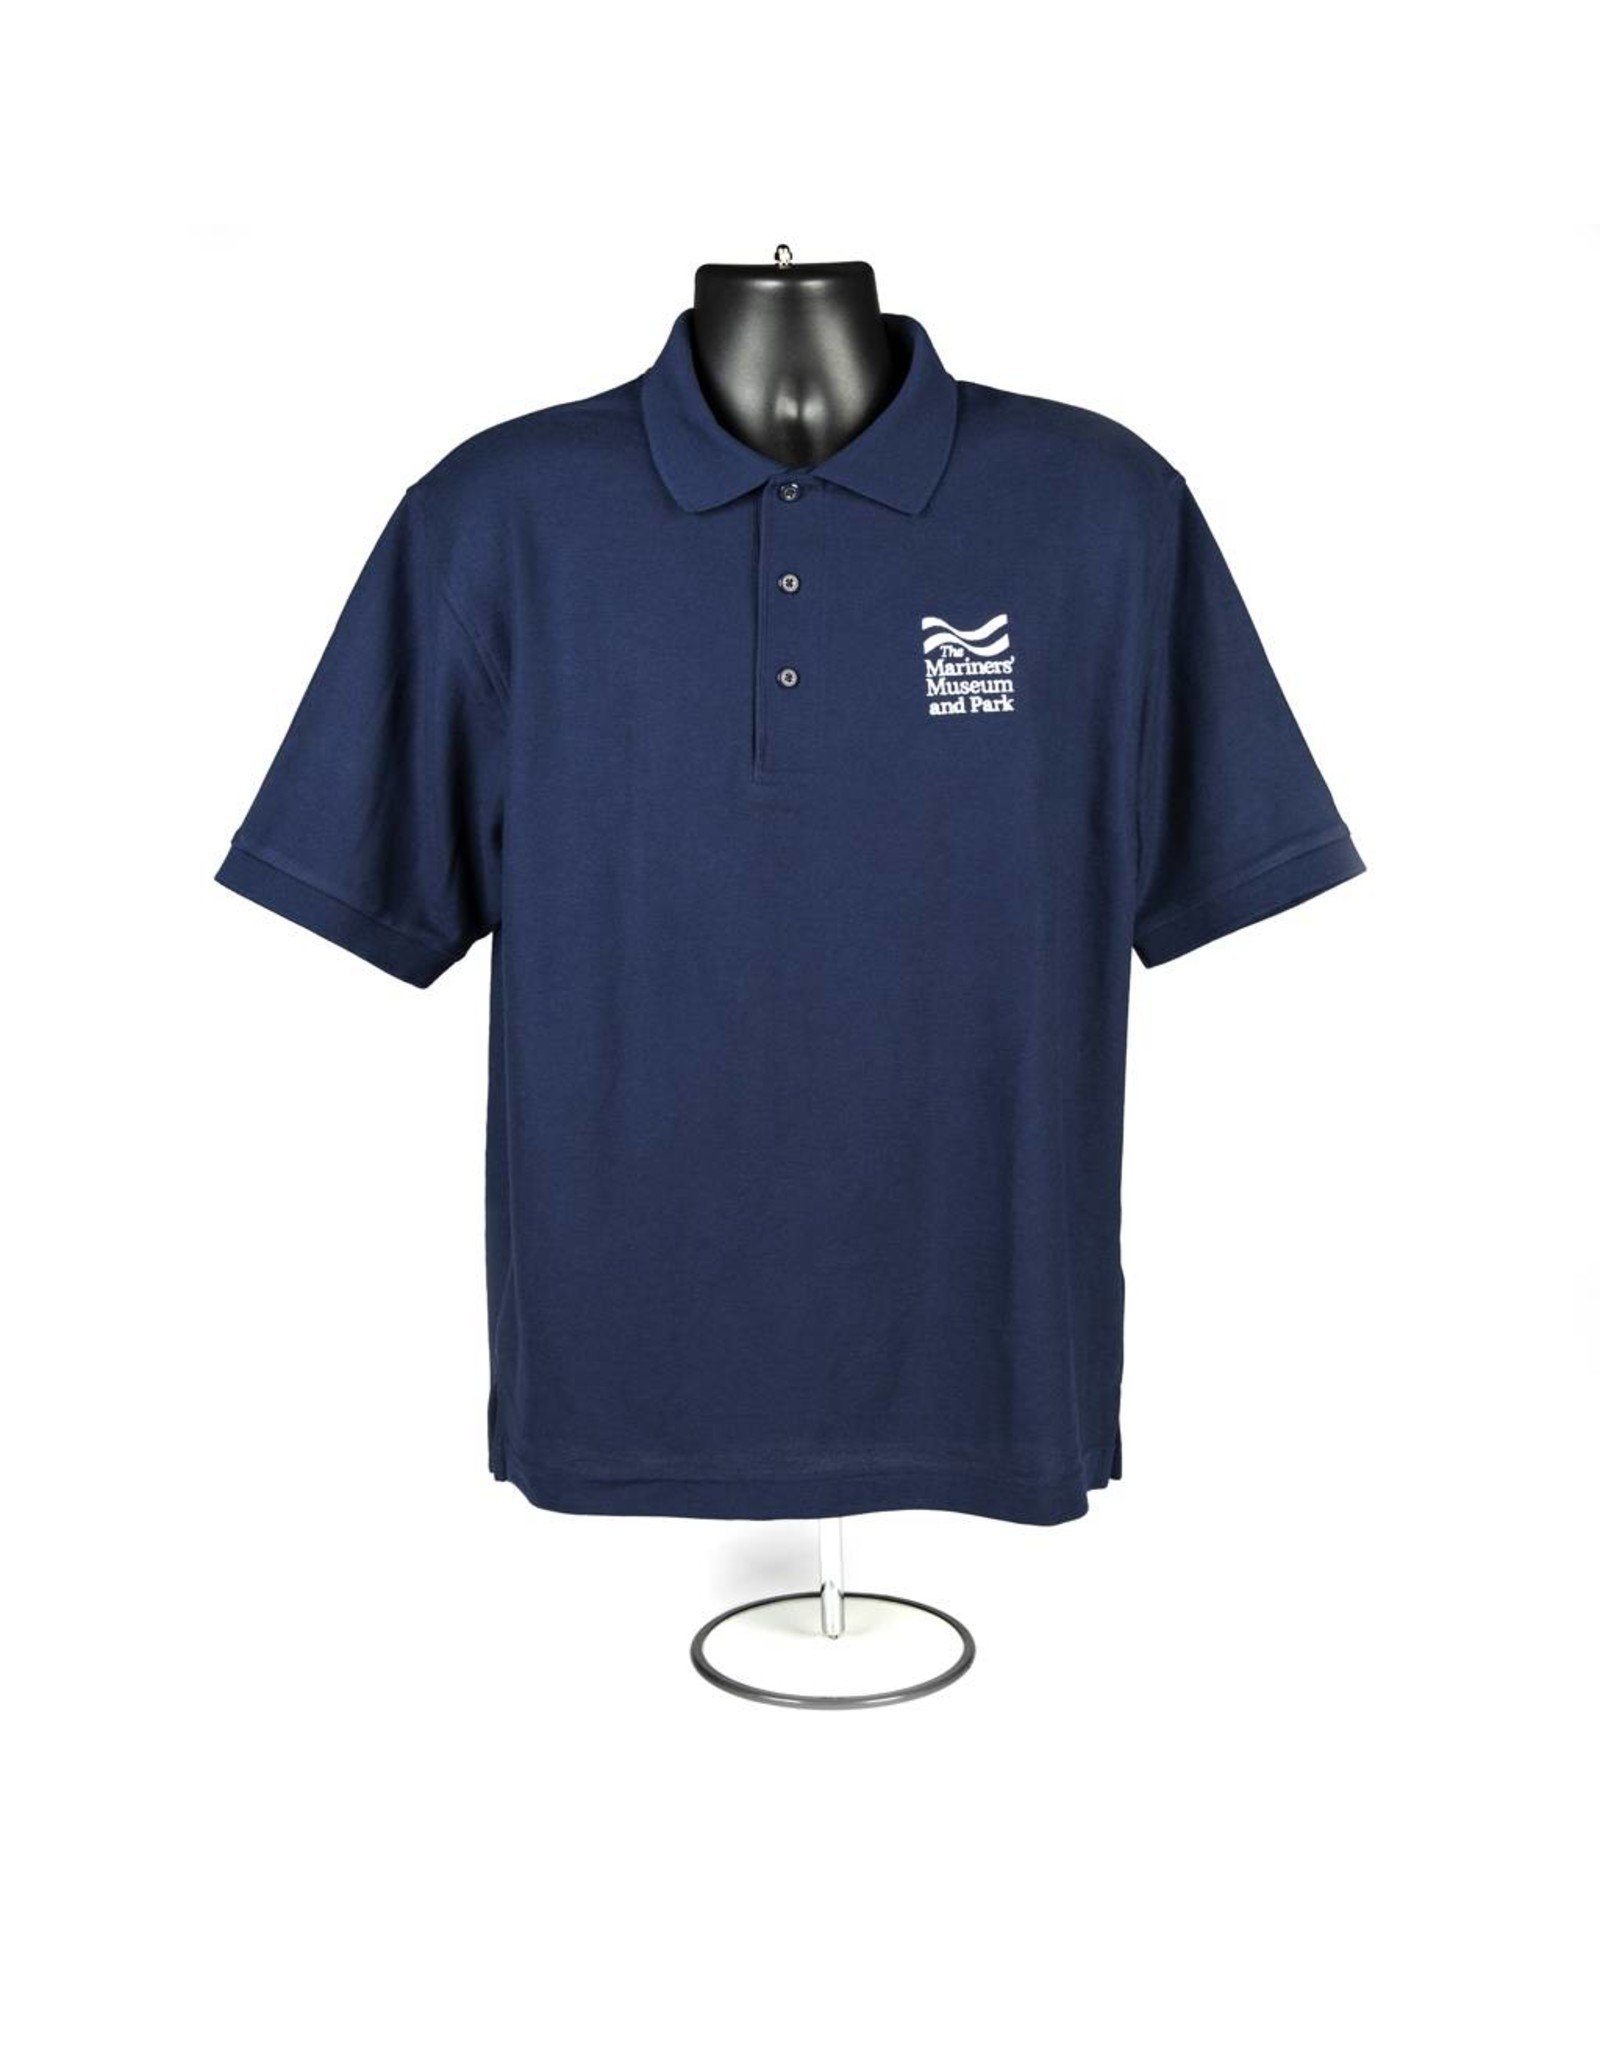 TMMP Polo - The Mariners' Museum Gift Shop